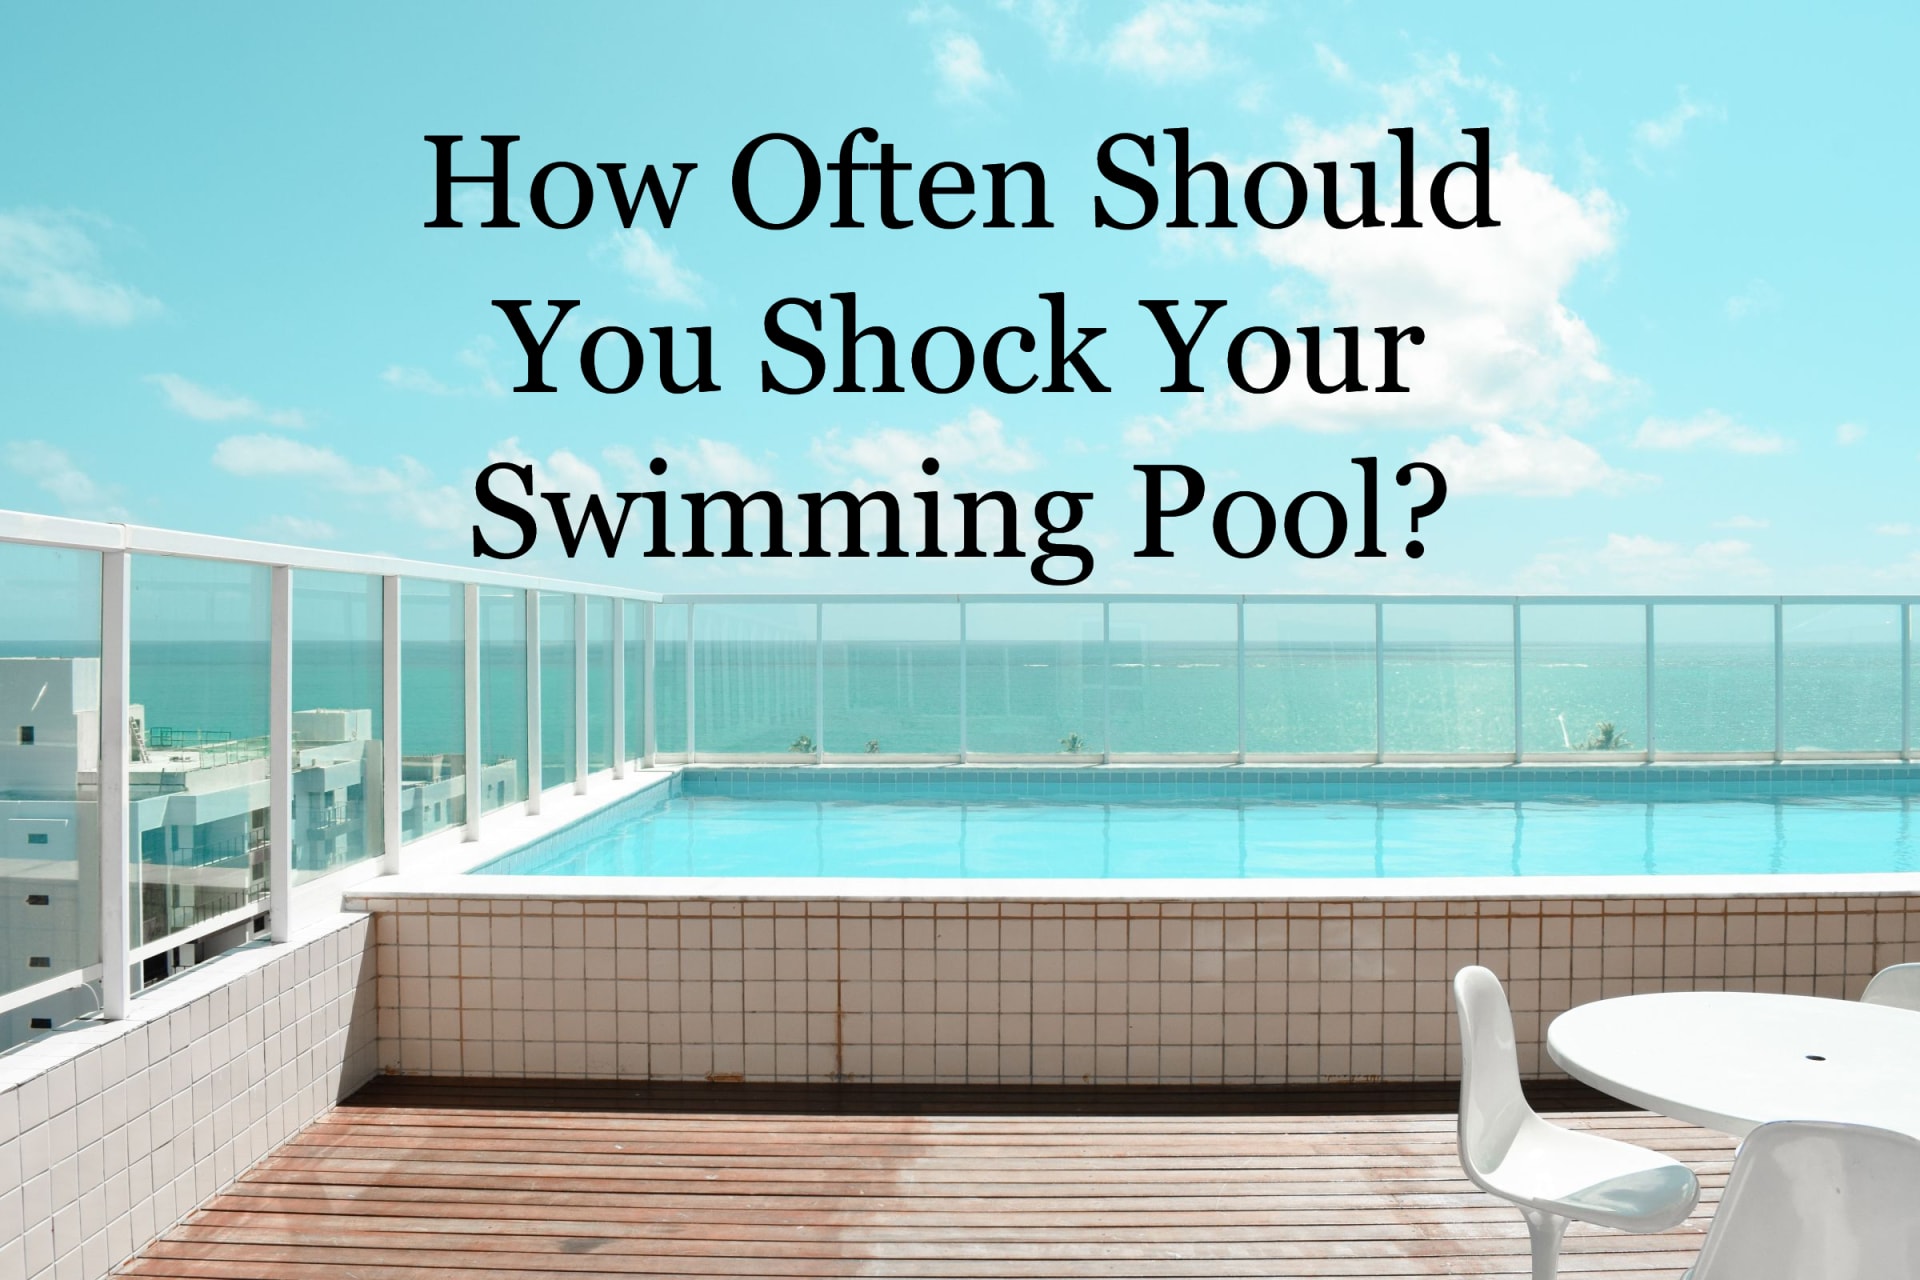 How Often Should You Shock Your Swimming Pool